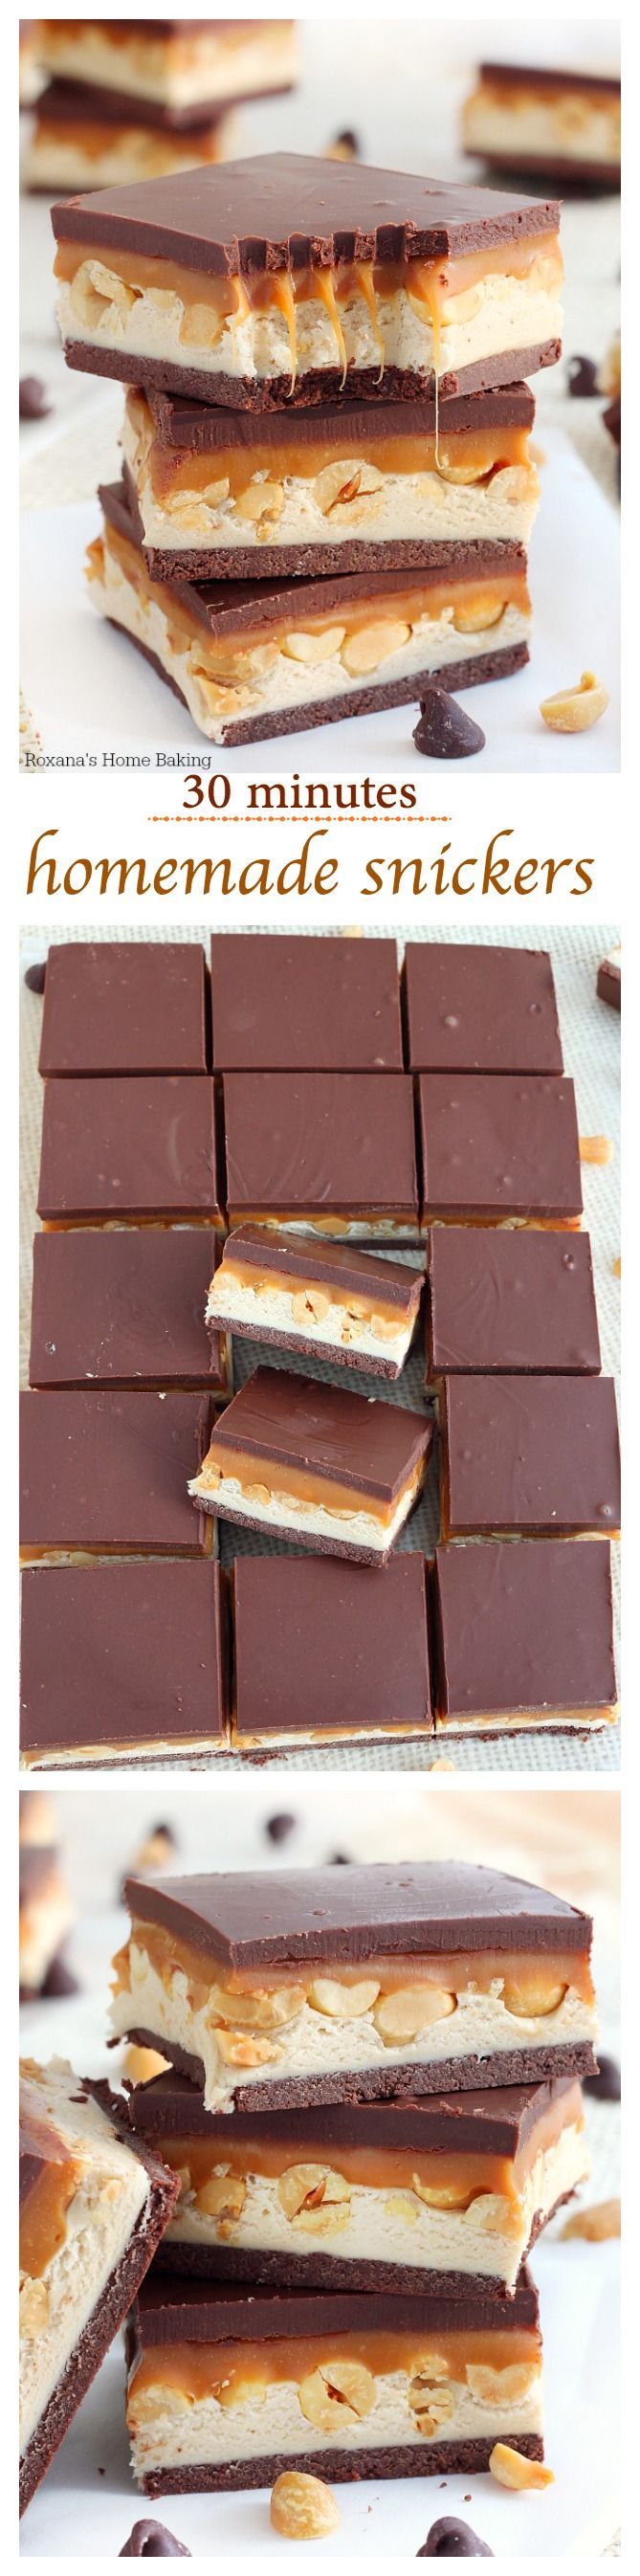 Nougat, peanuts and caramel sandwiched between two chocolate layers, these homemade snickers bars come together in 30 minutes